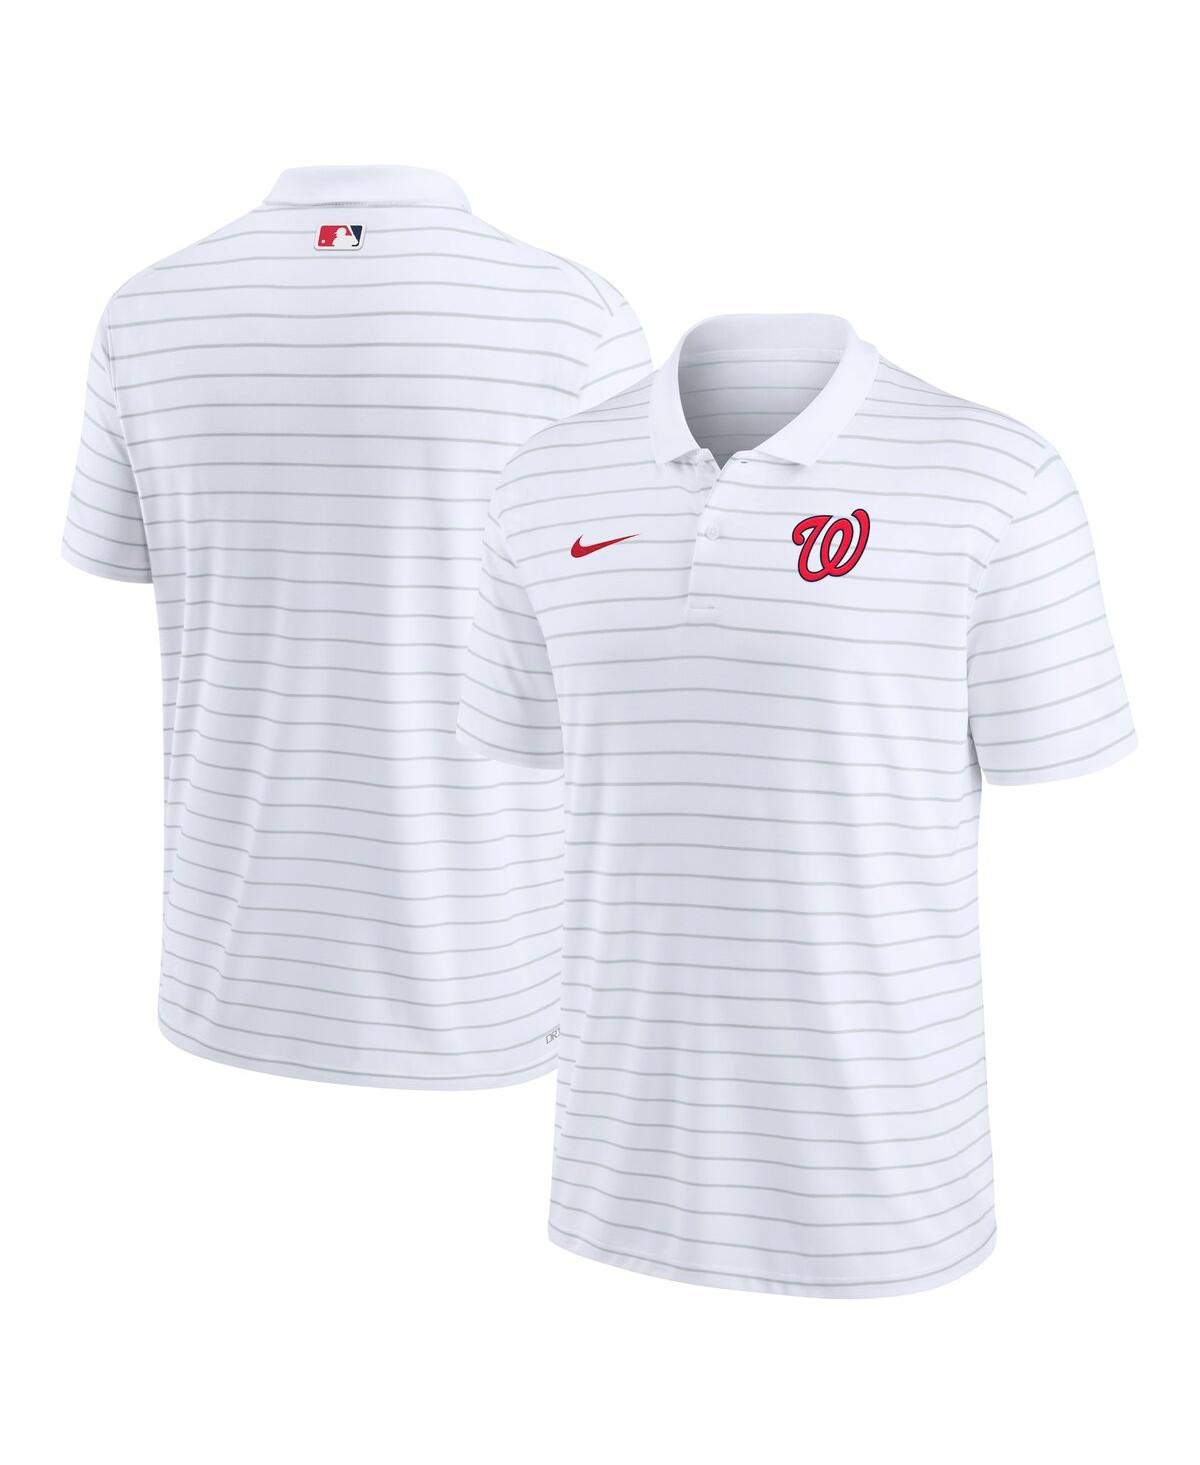 Shop Nike Men's  White Washington Nationals Authentic Collection Victory Striped Performance Polo Shirt